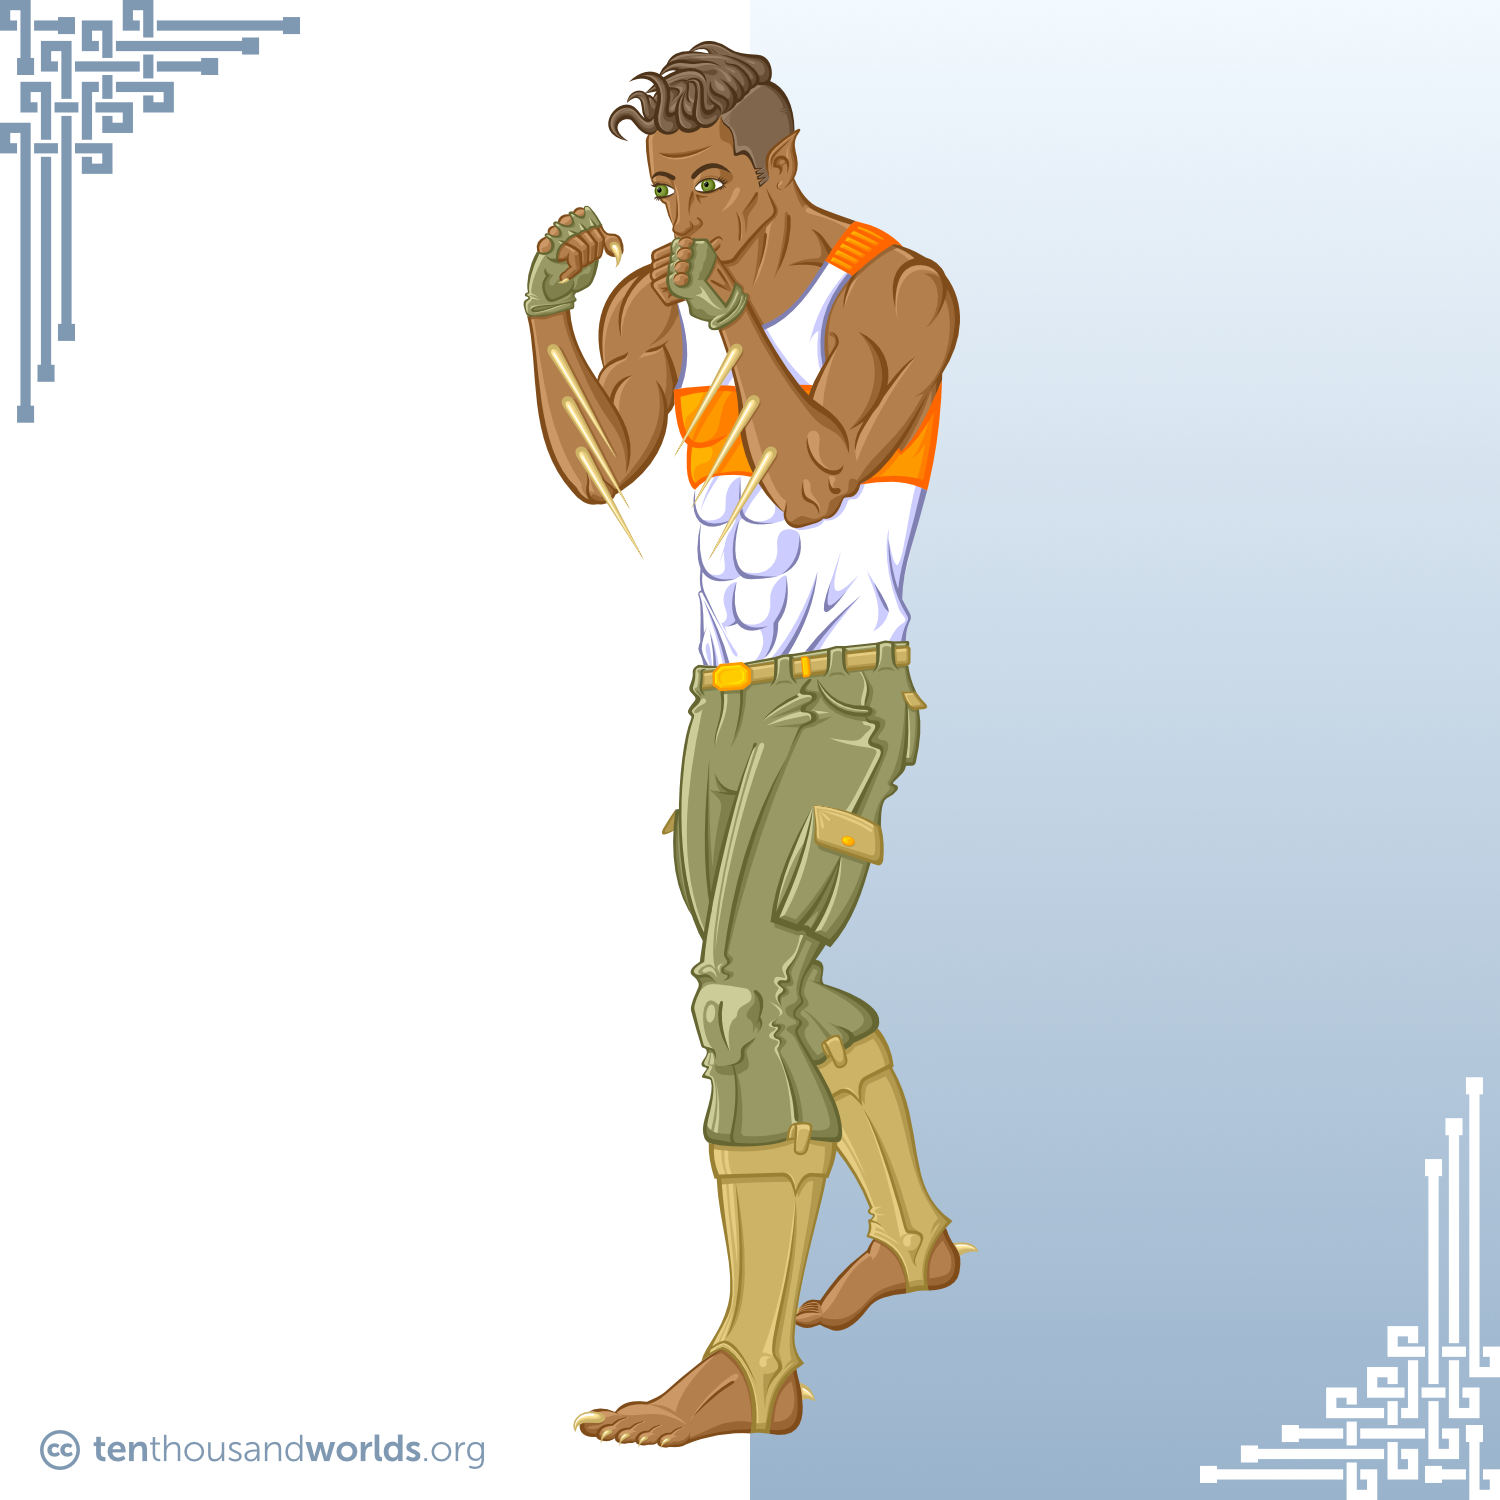 A mostly-human man in a boxer’s stance, with pointed ears, claws, foot spurs, and long spines coming from his forearms. He wears an orange-and-white athletic shirt and olive military-style trousers tucked into spats that leave exposed the natural weapons on his feet.